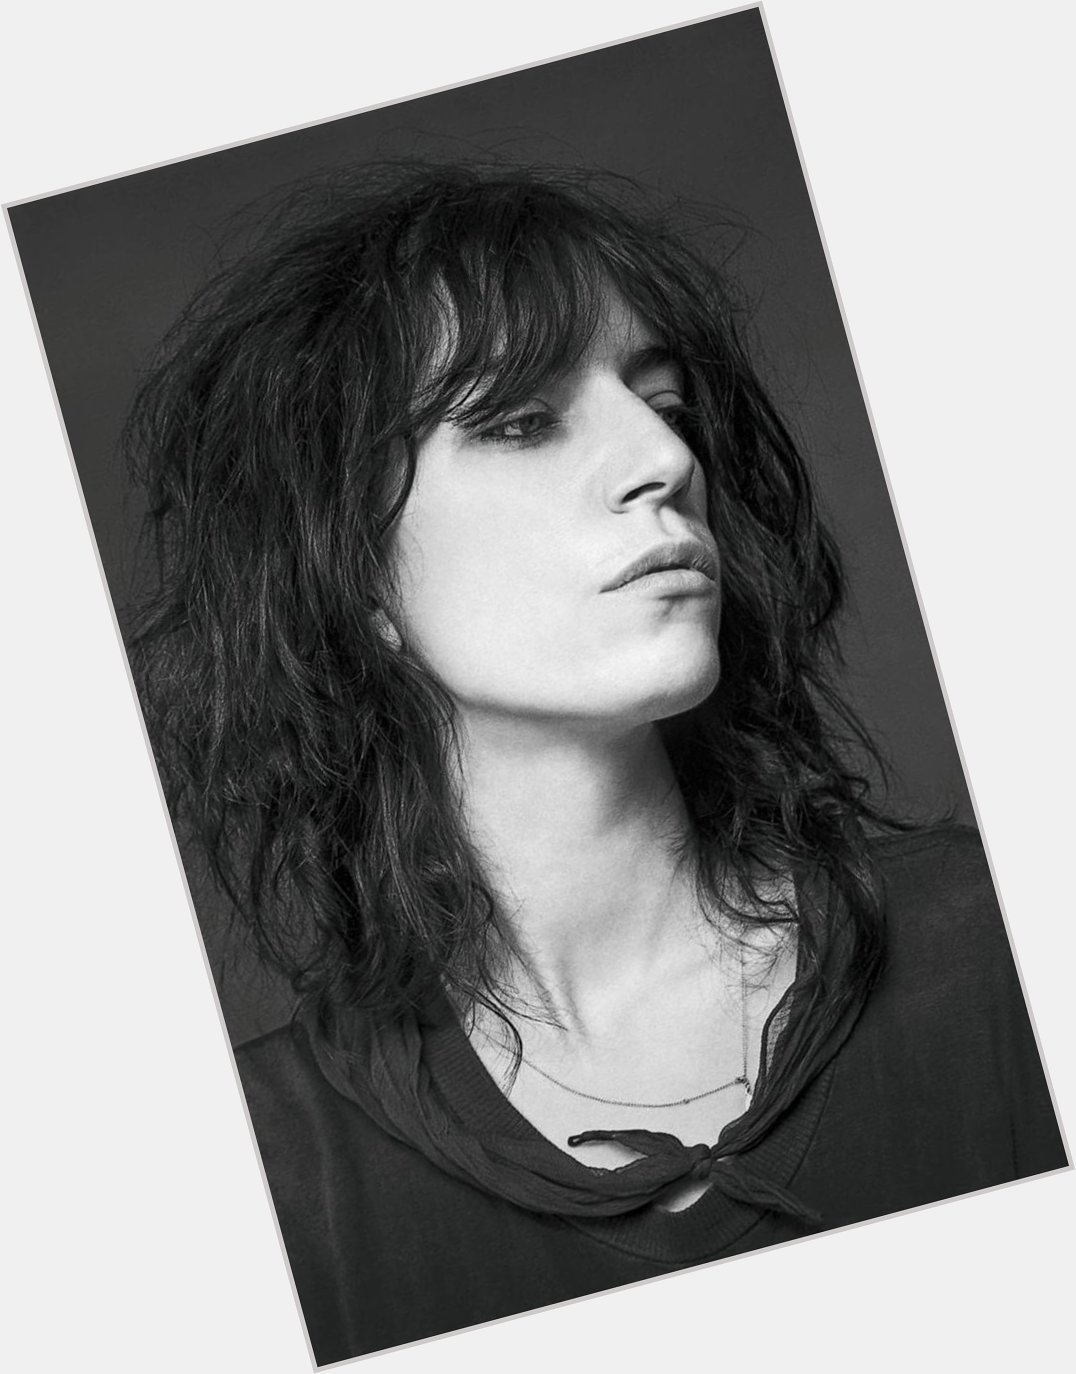 Happy Birthday to Patti Smith - one of the most authentic and inspiring artists on the planet. 